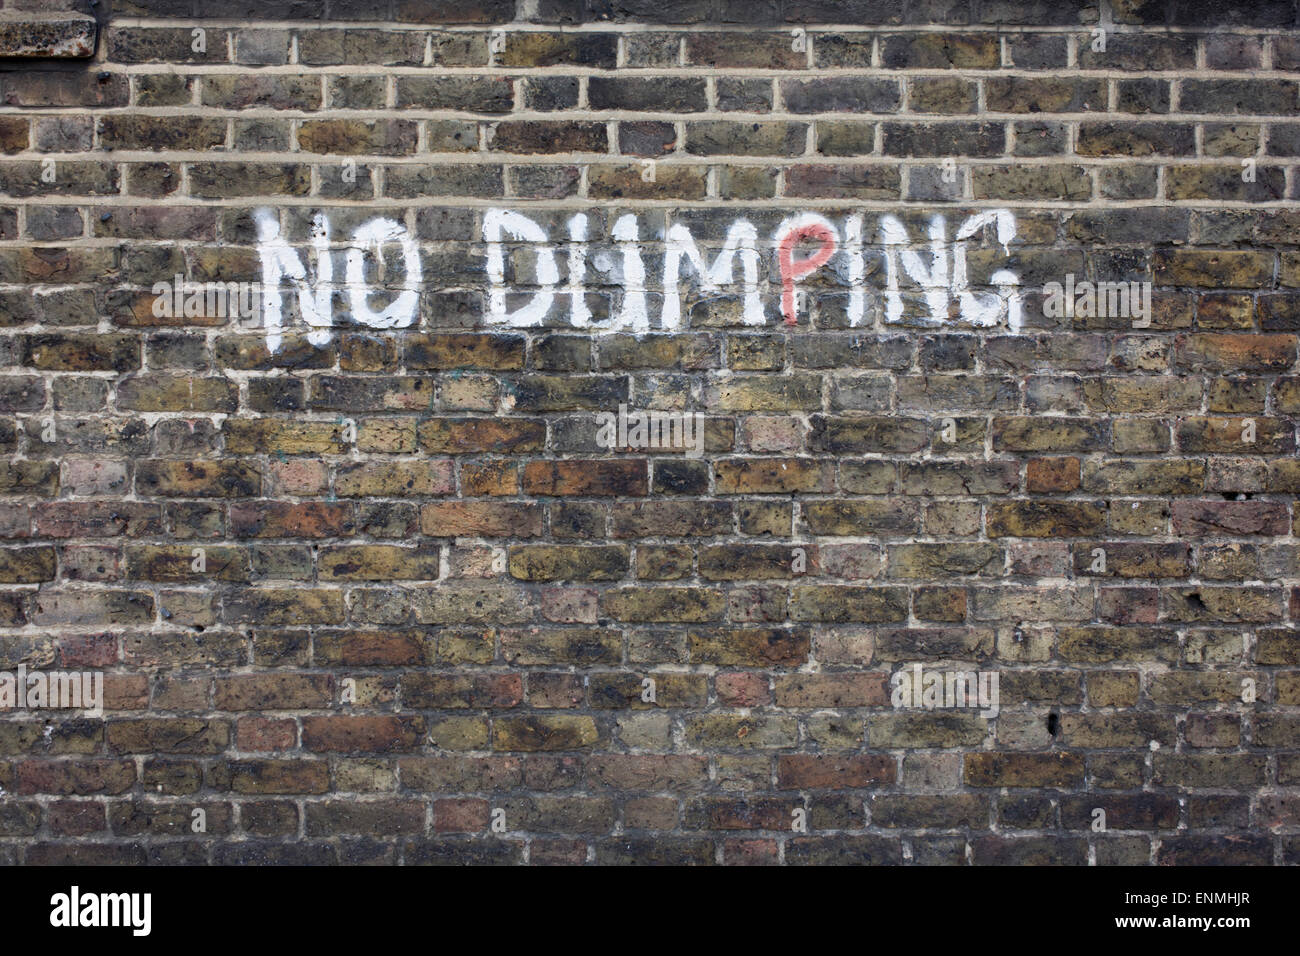 No Dumping writing painted on an urban brick wall in the south London borough of Lewisham, SE5. Stock Photo